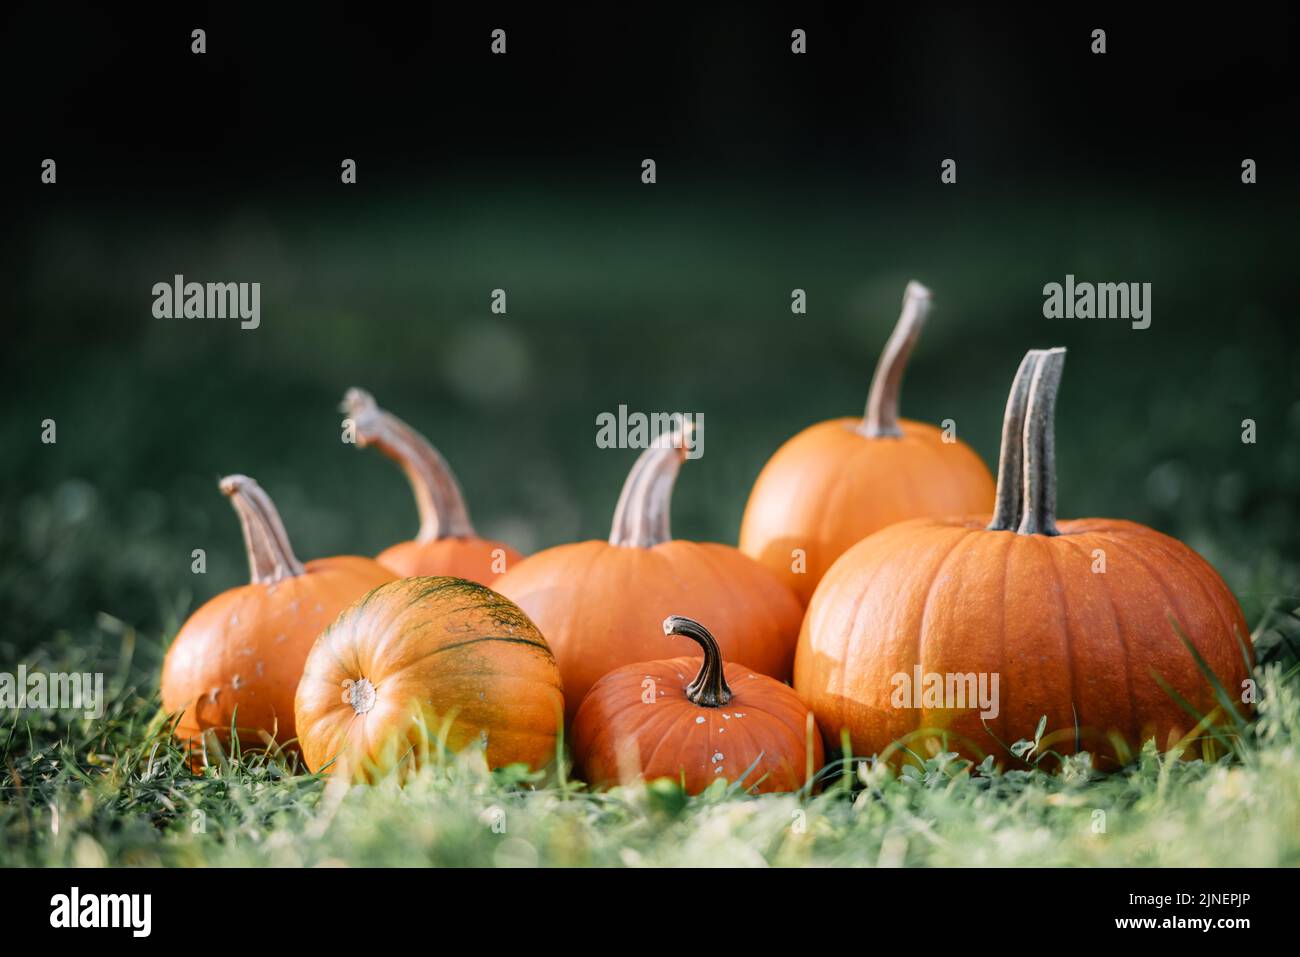 Different kind of pumpkins in garden grass. Halloween and thanksgiving holiday and autumn harvest background Stock Photo